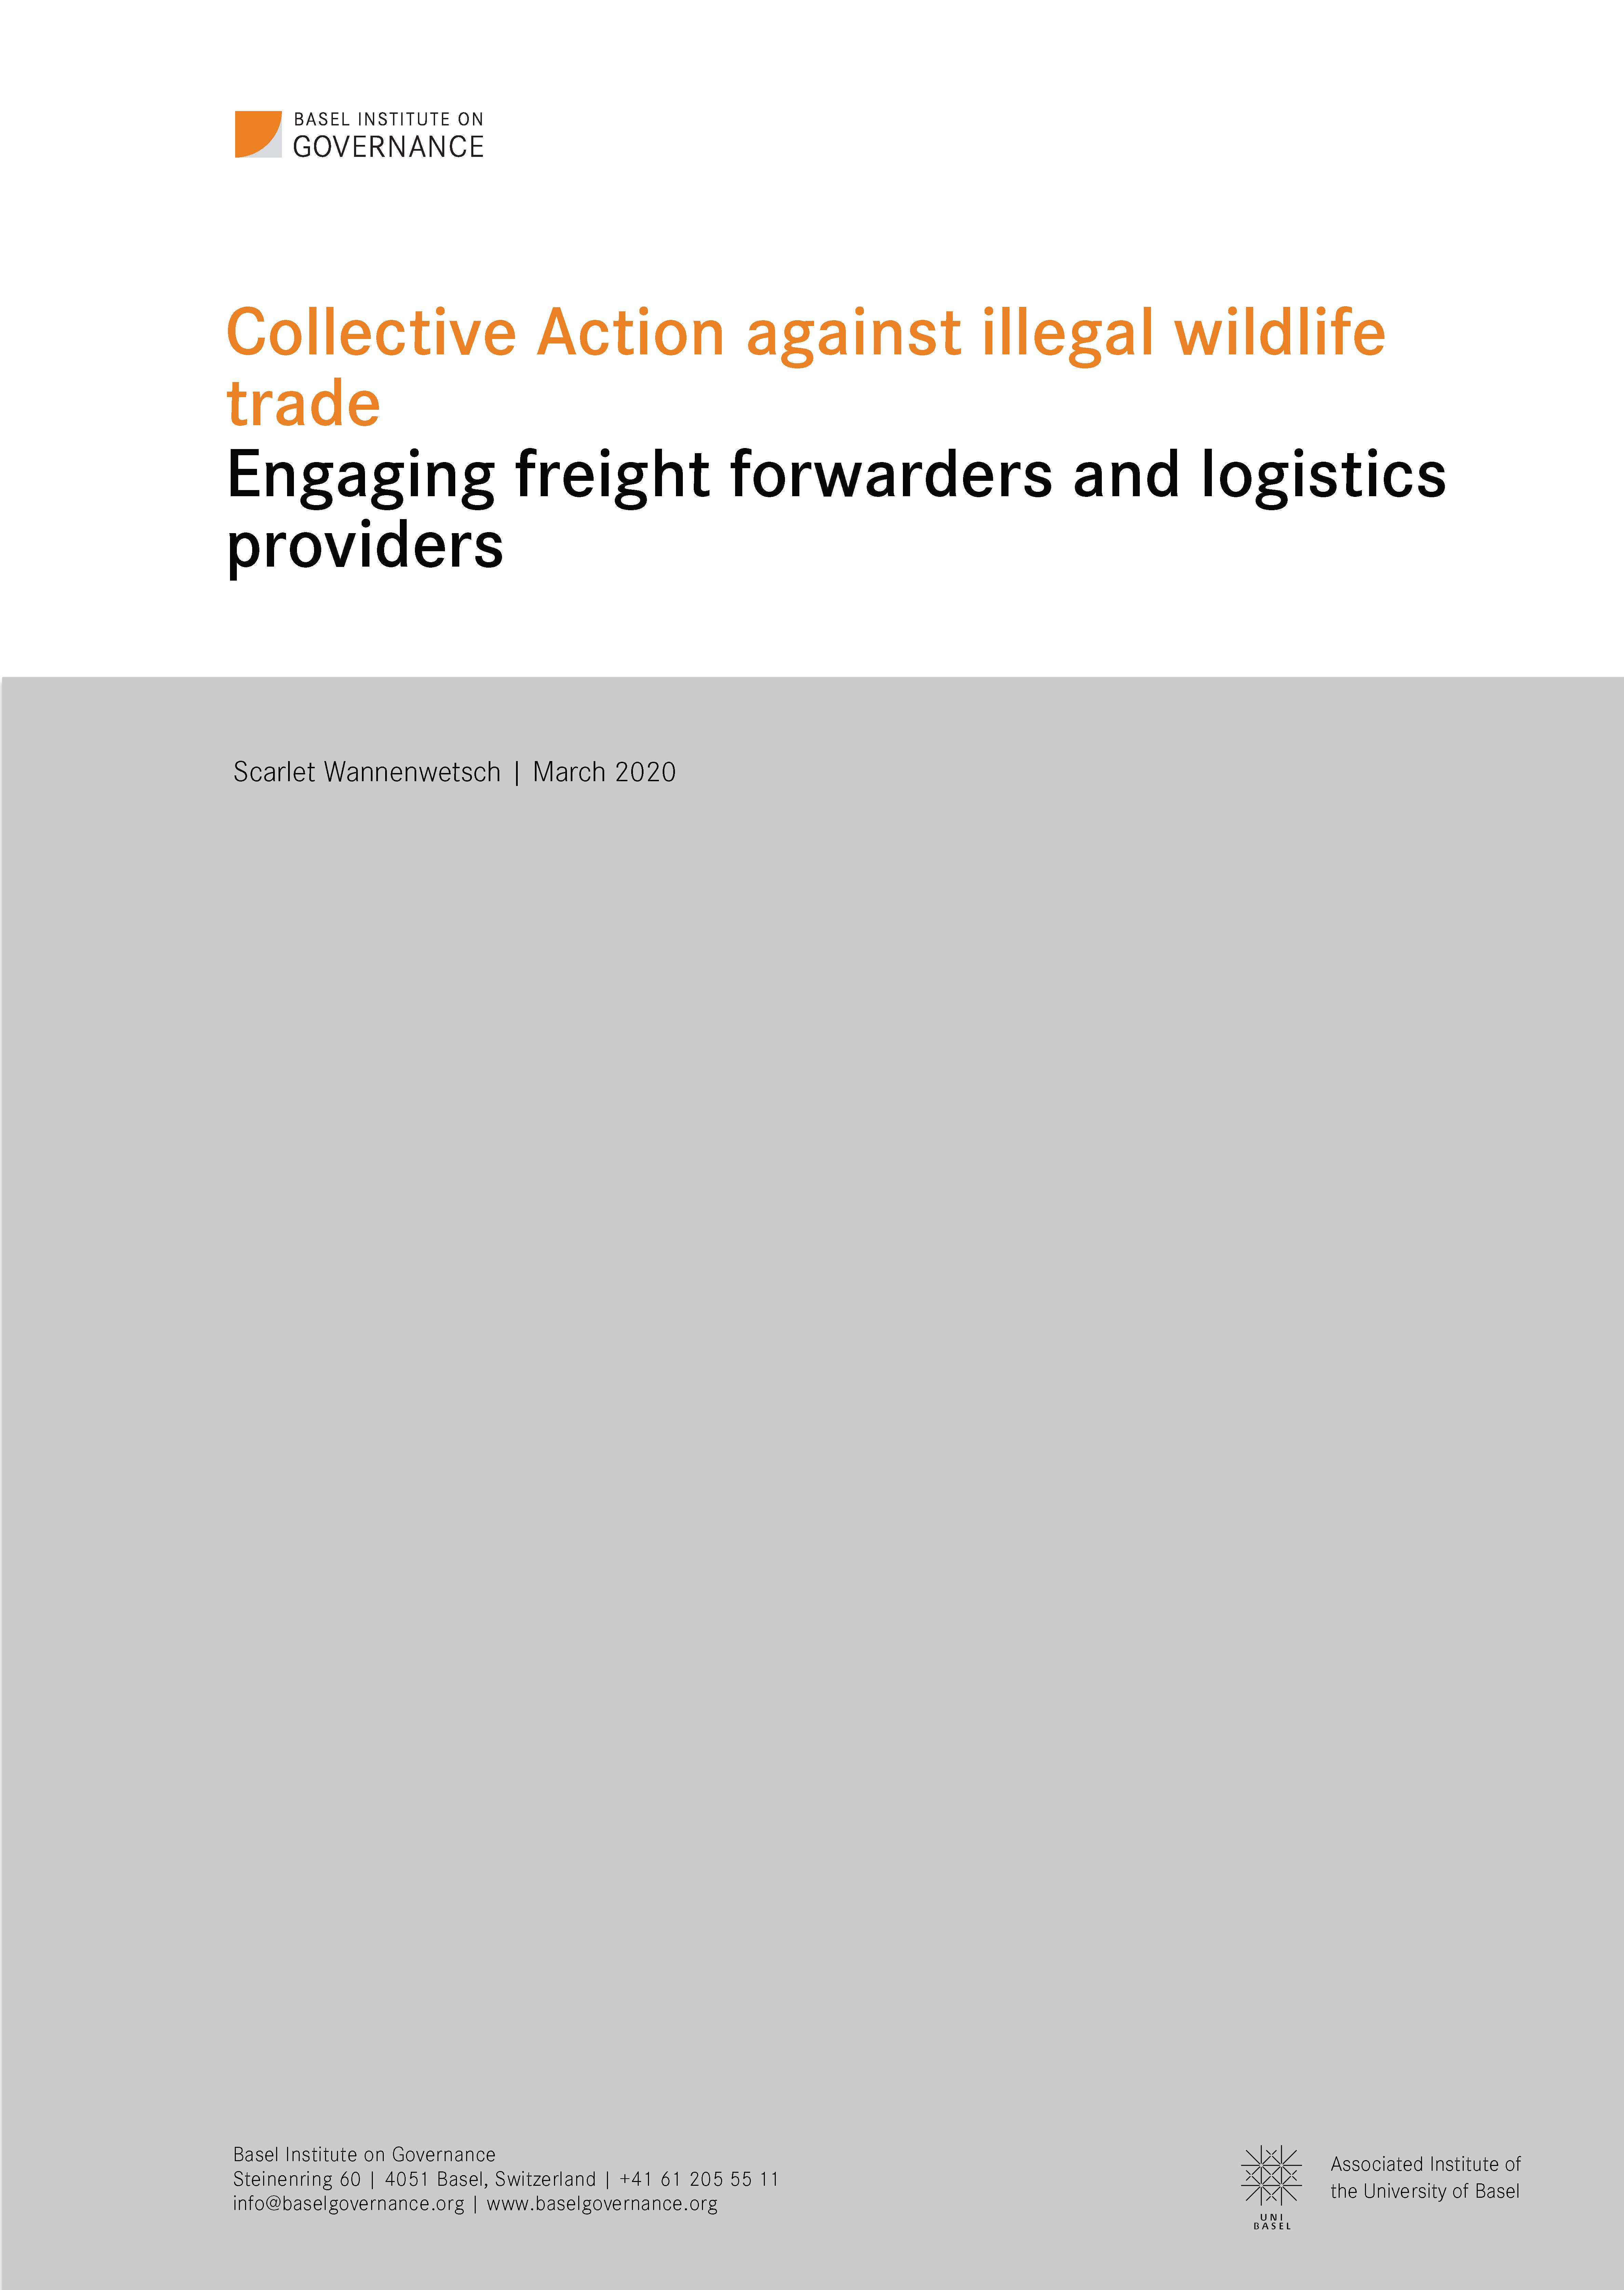 Cover page on report into illegal wildlife trade, collective action and freight forwarders